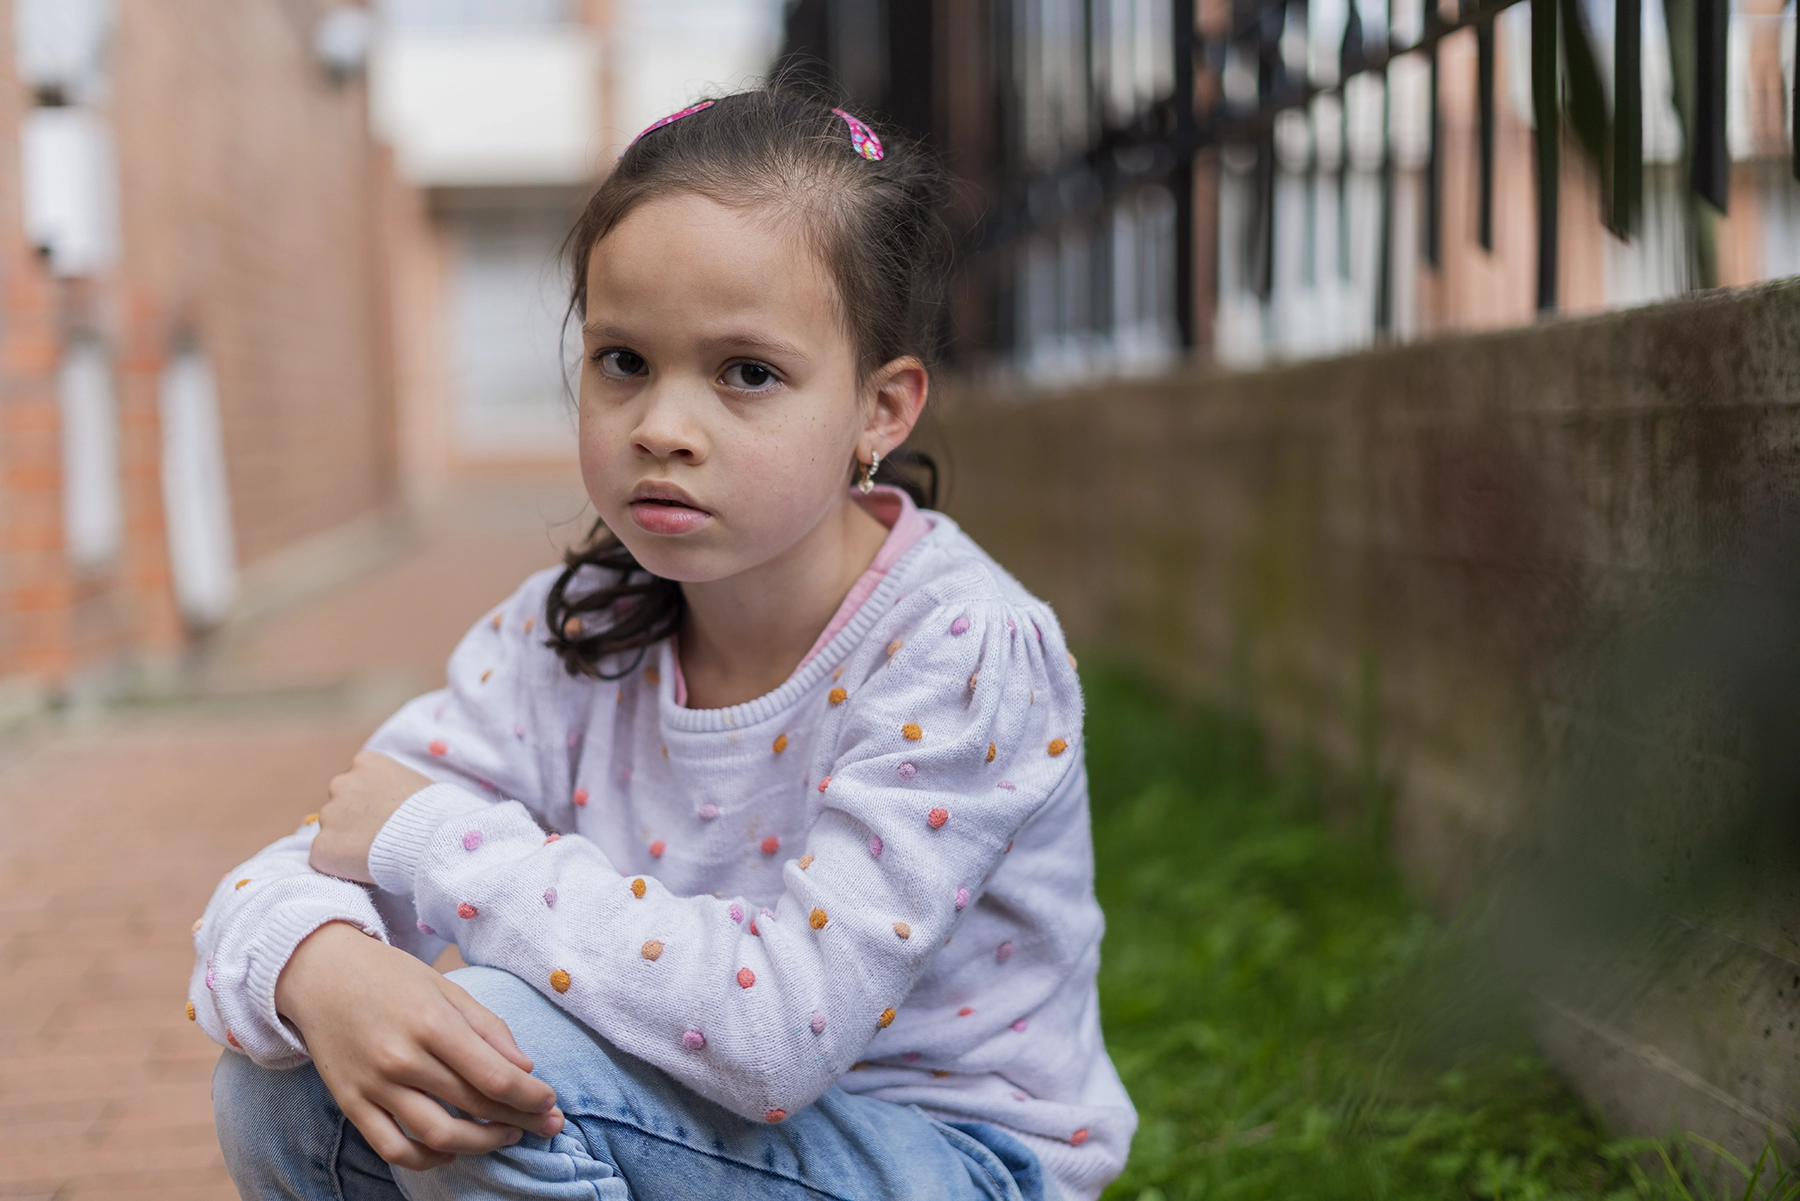 Young Hispanic girl is sitting outside a school by herself and appears to be sad.